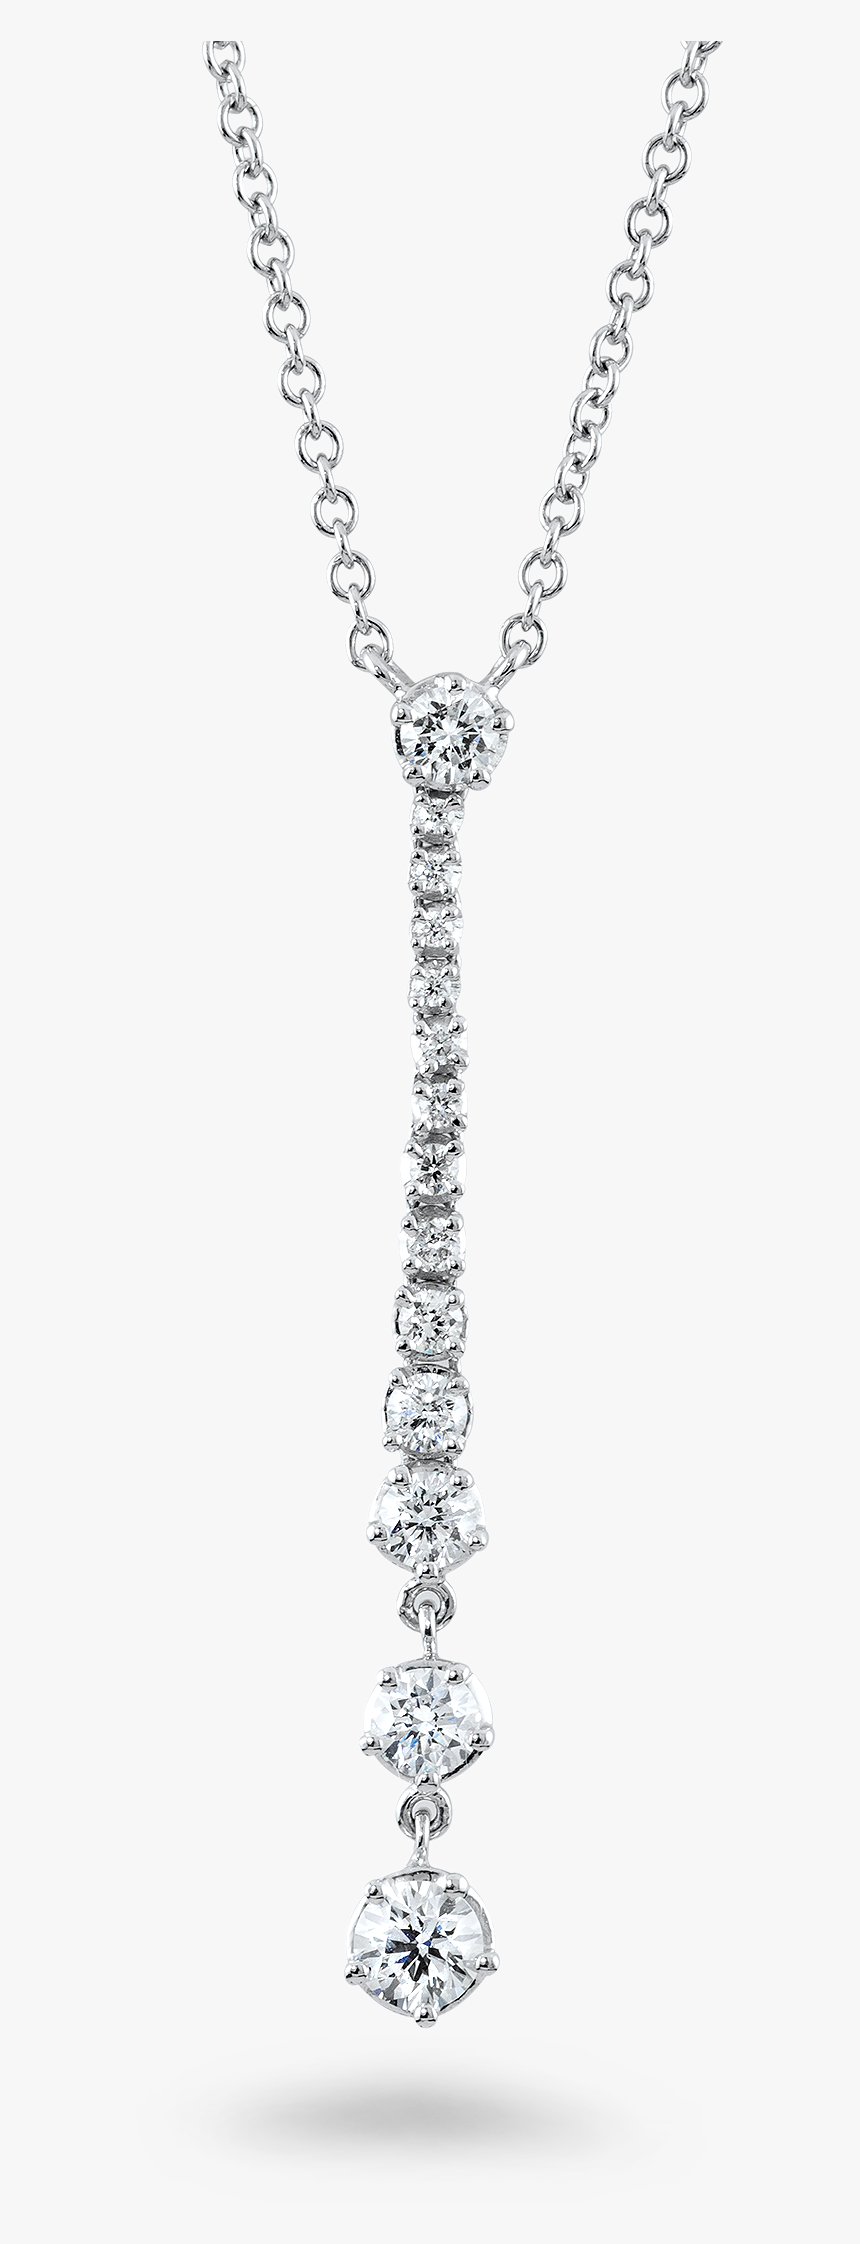 48 Carat Diamond Necklace, HD Png Download, Free Download